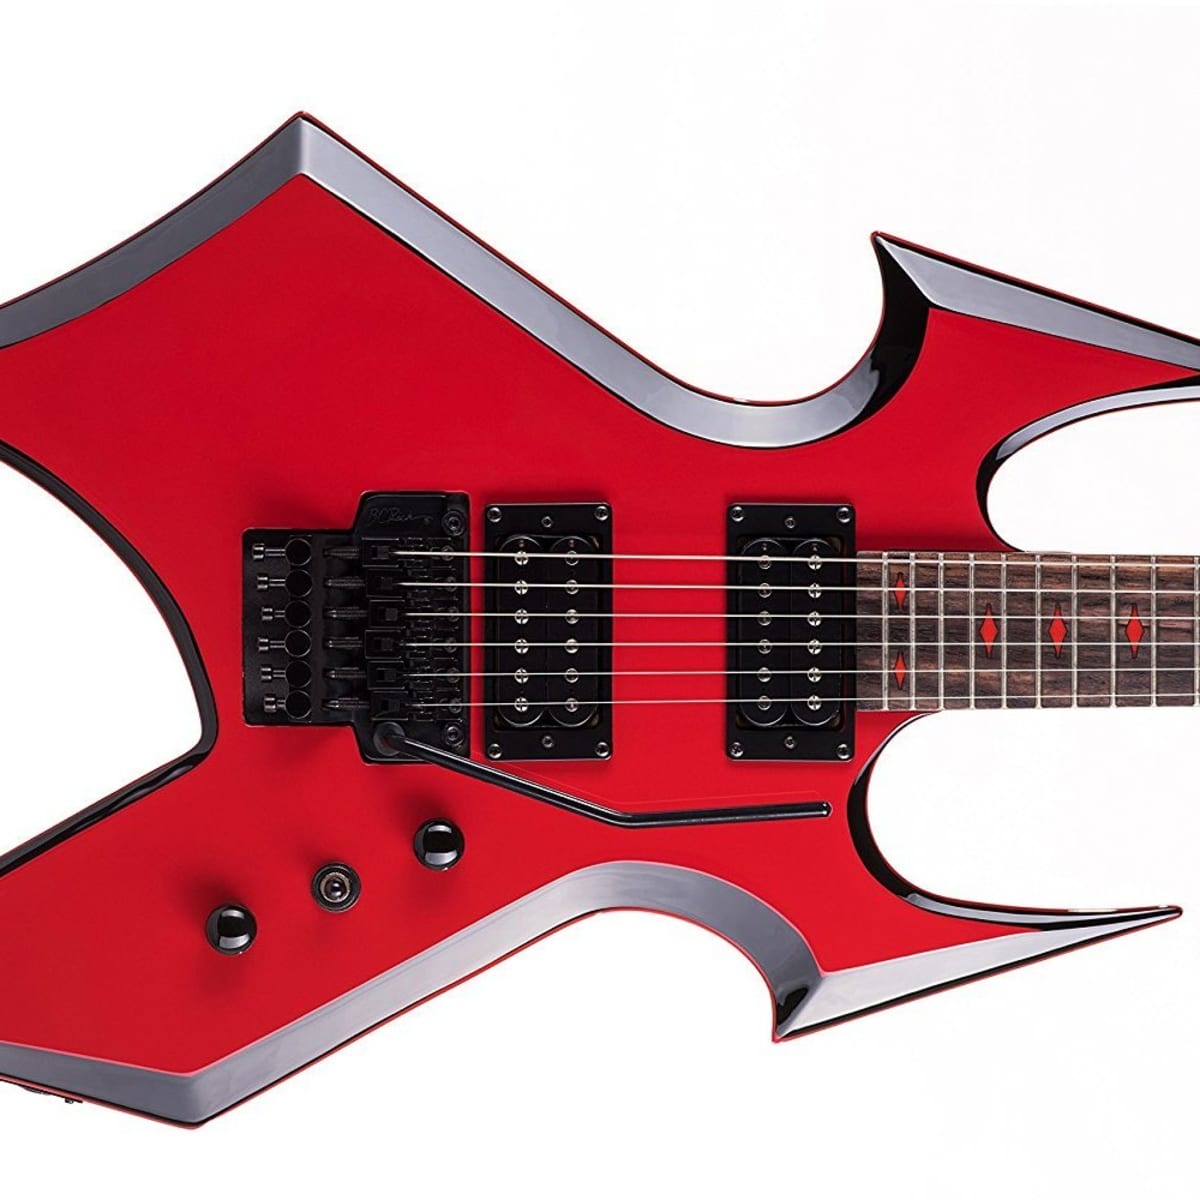 bc rich gitare - ablessingtooneanother.org.